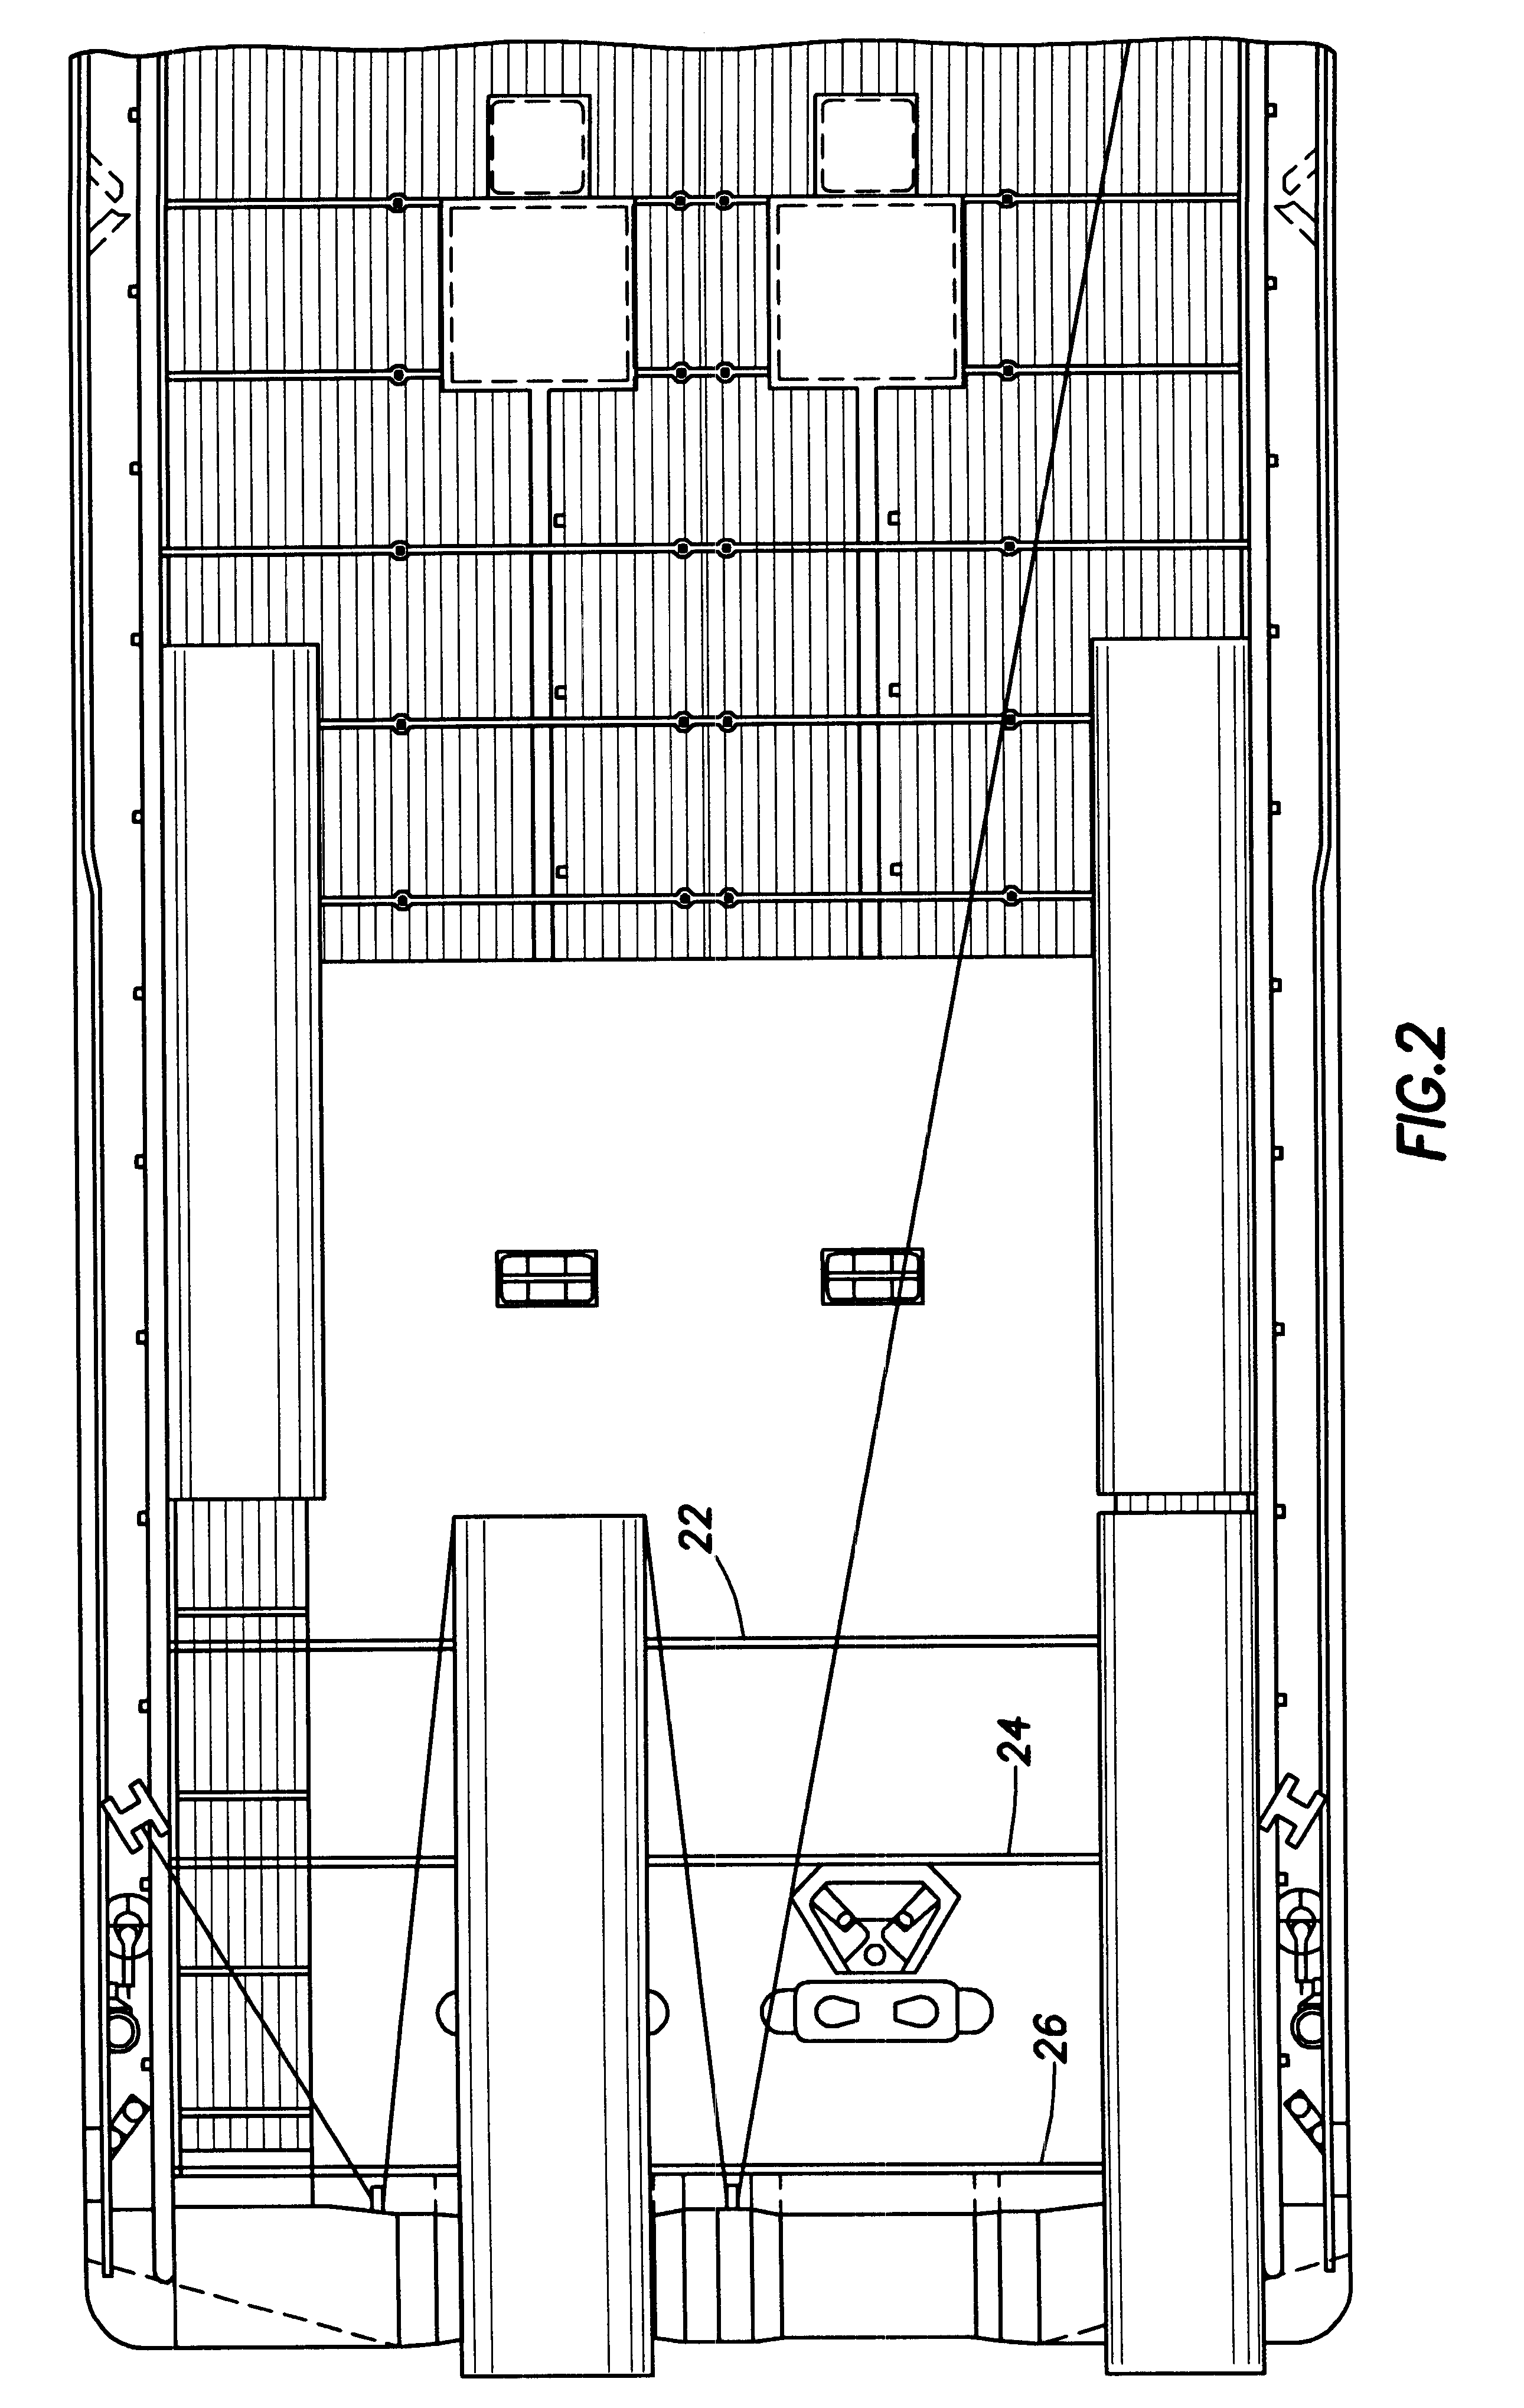 Method and apparatus for suction anchor and mooring deployment and connection